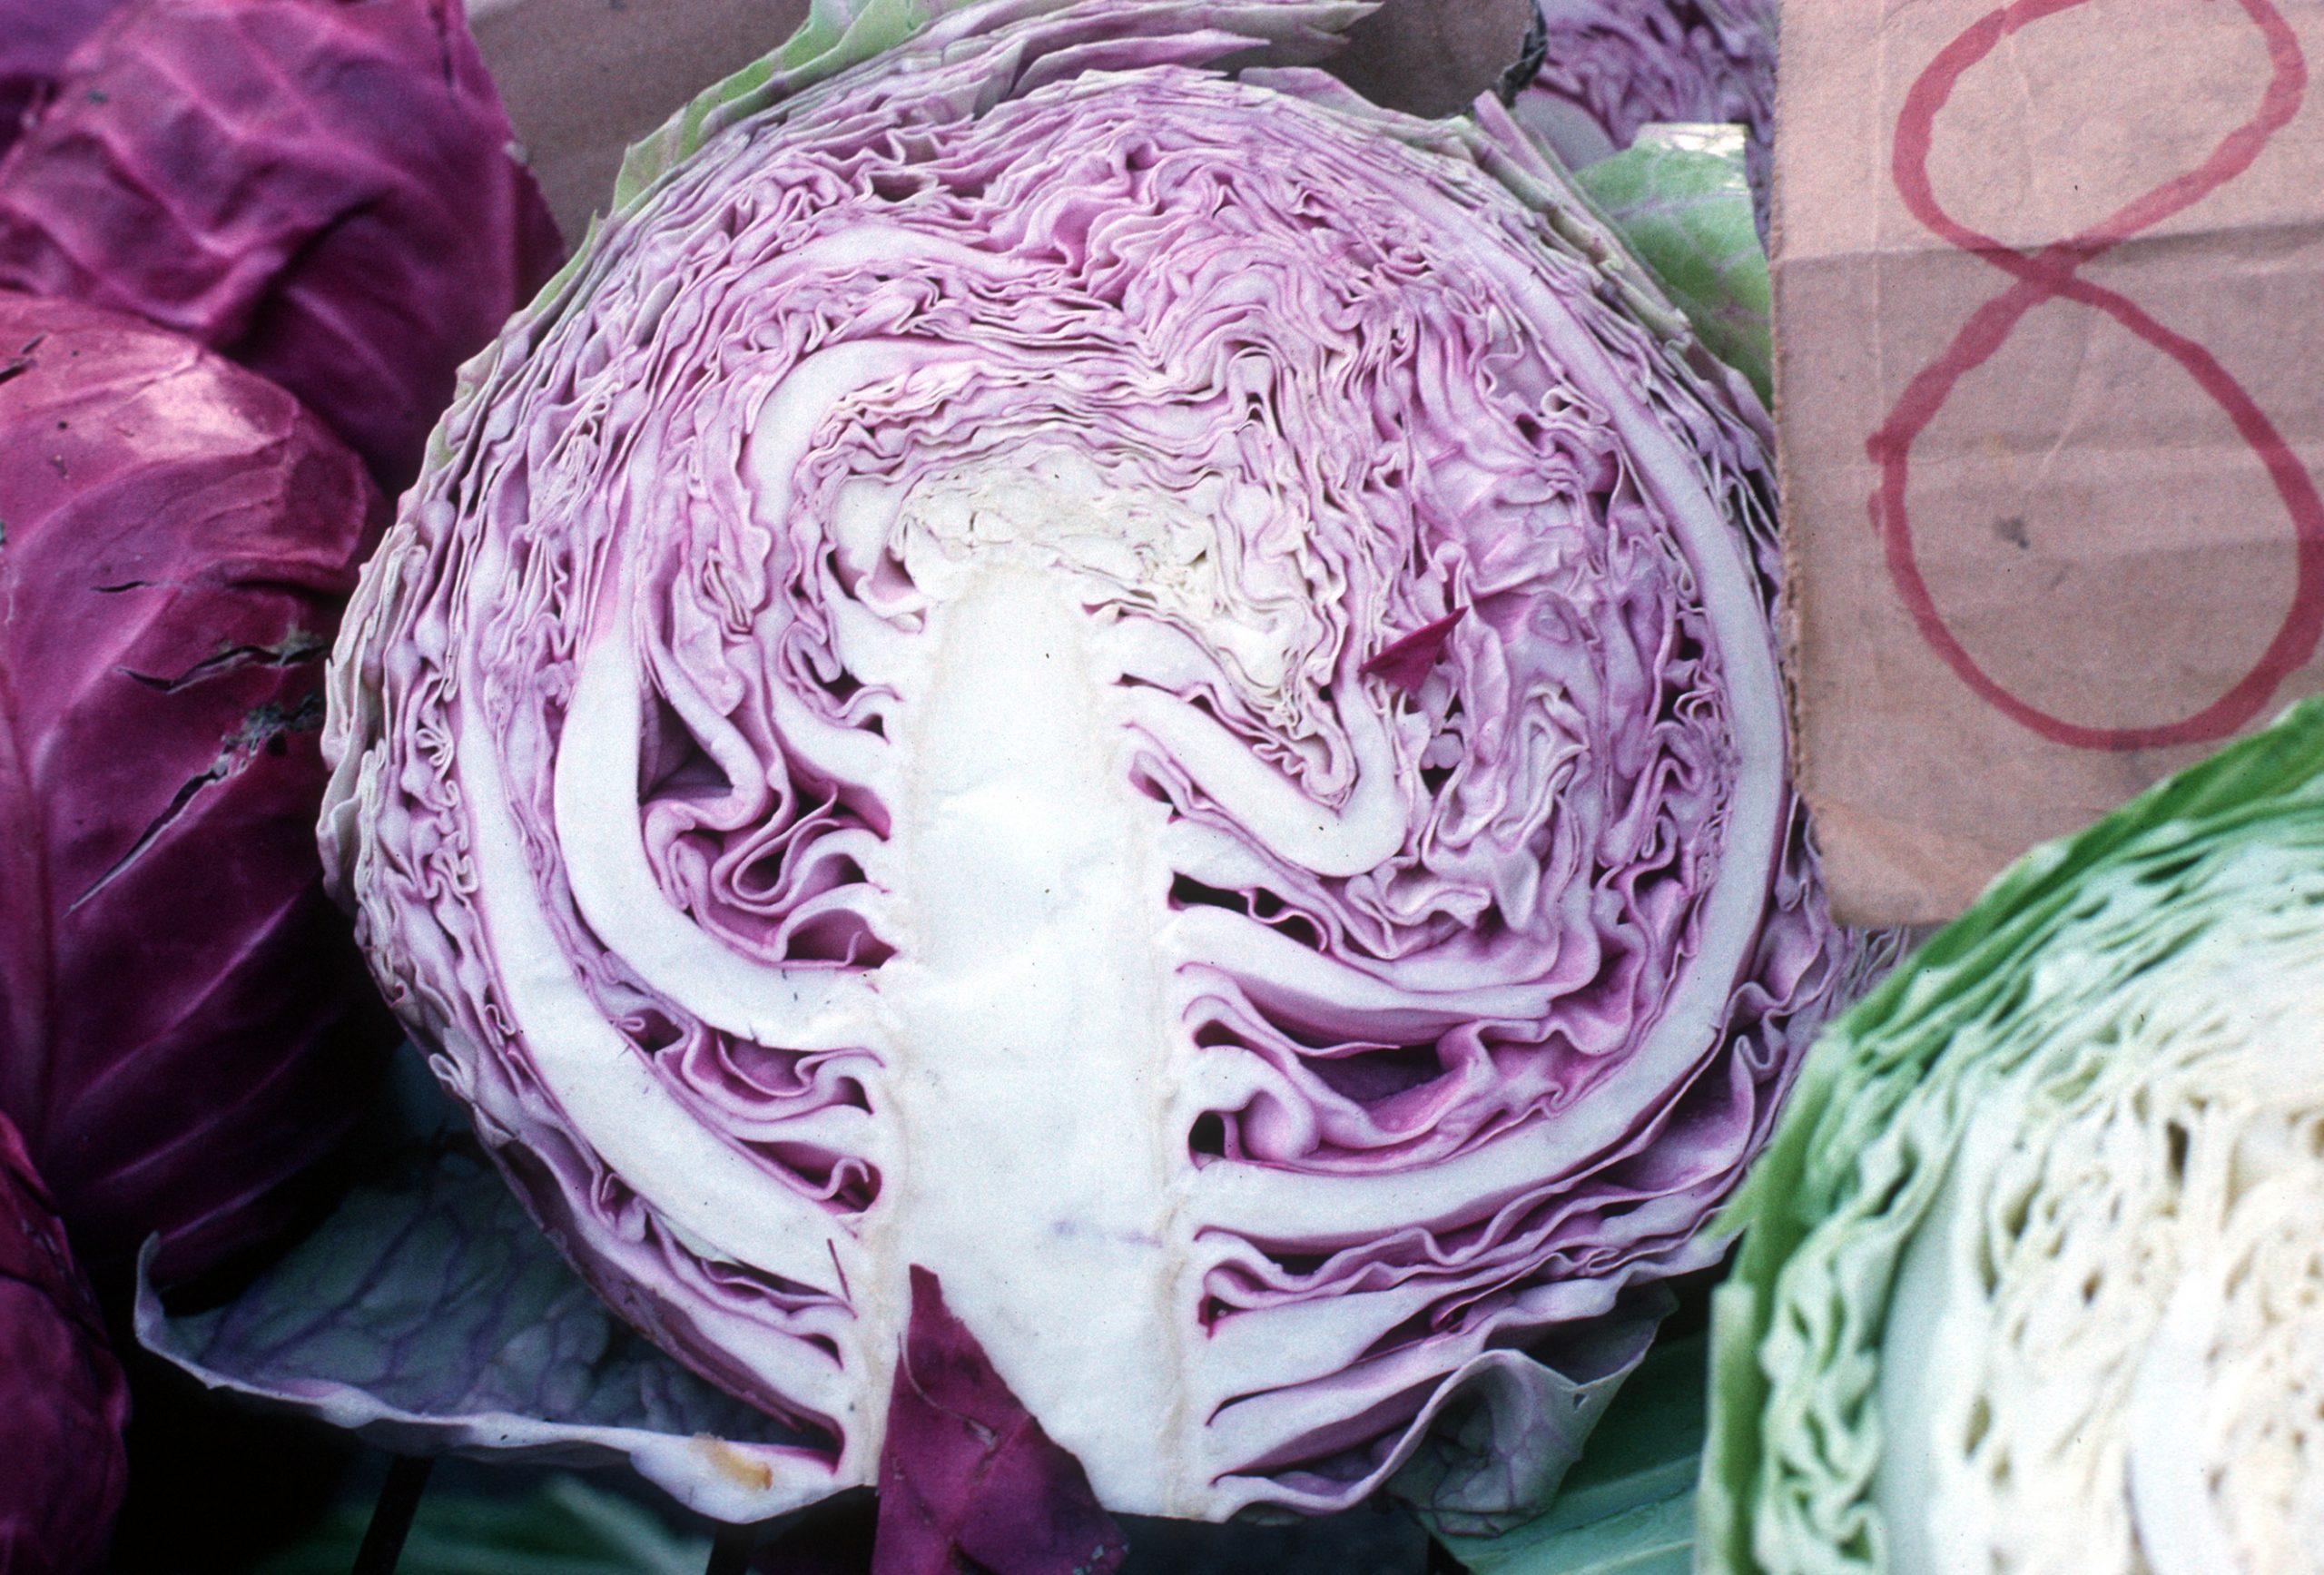 vertical section through a red cabbage showing central white stem and surrounding purple leaves